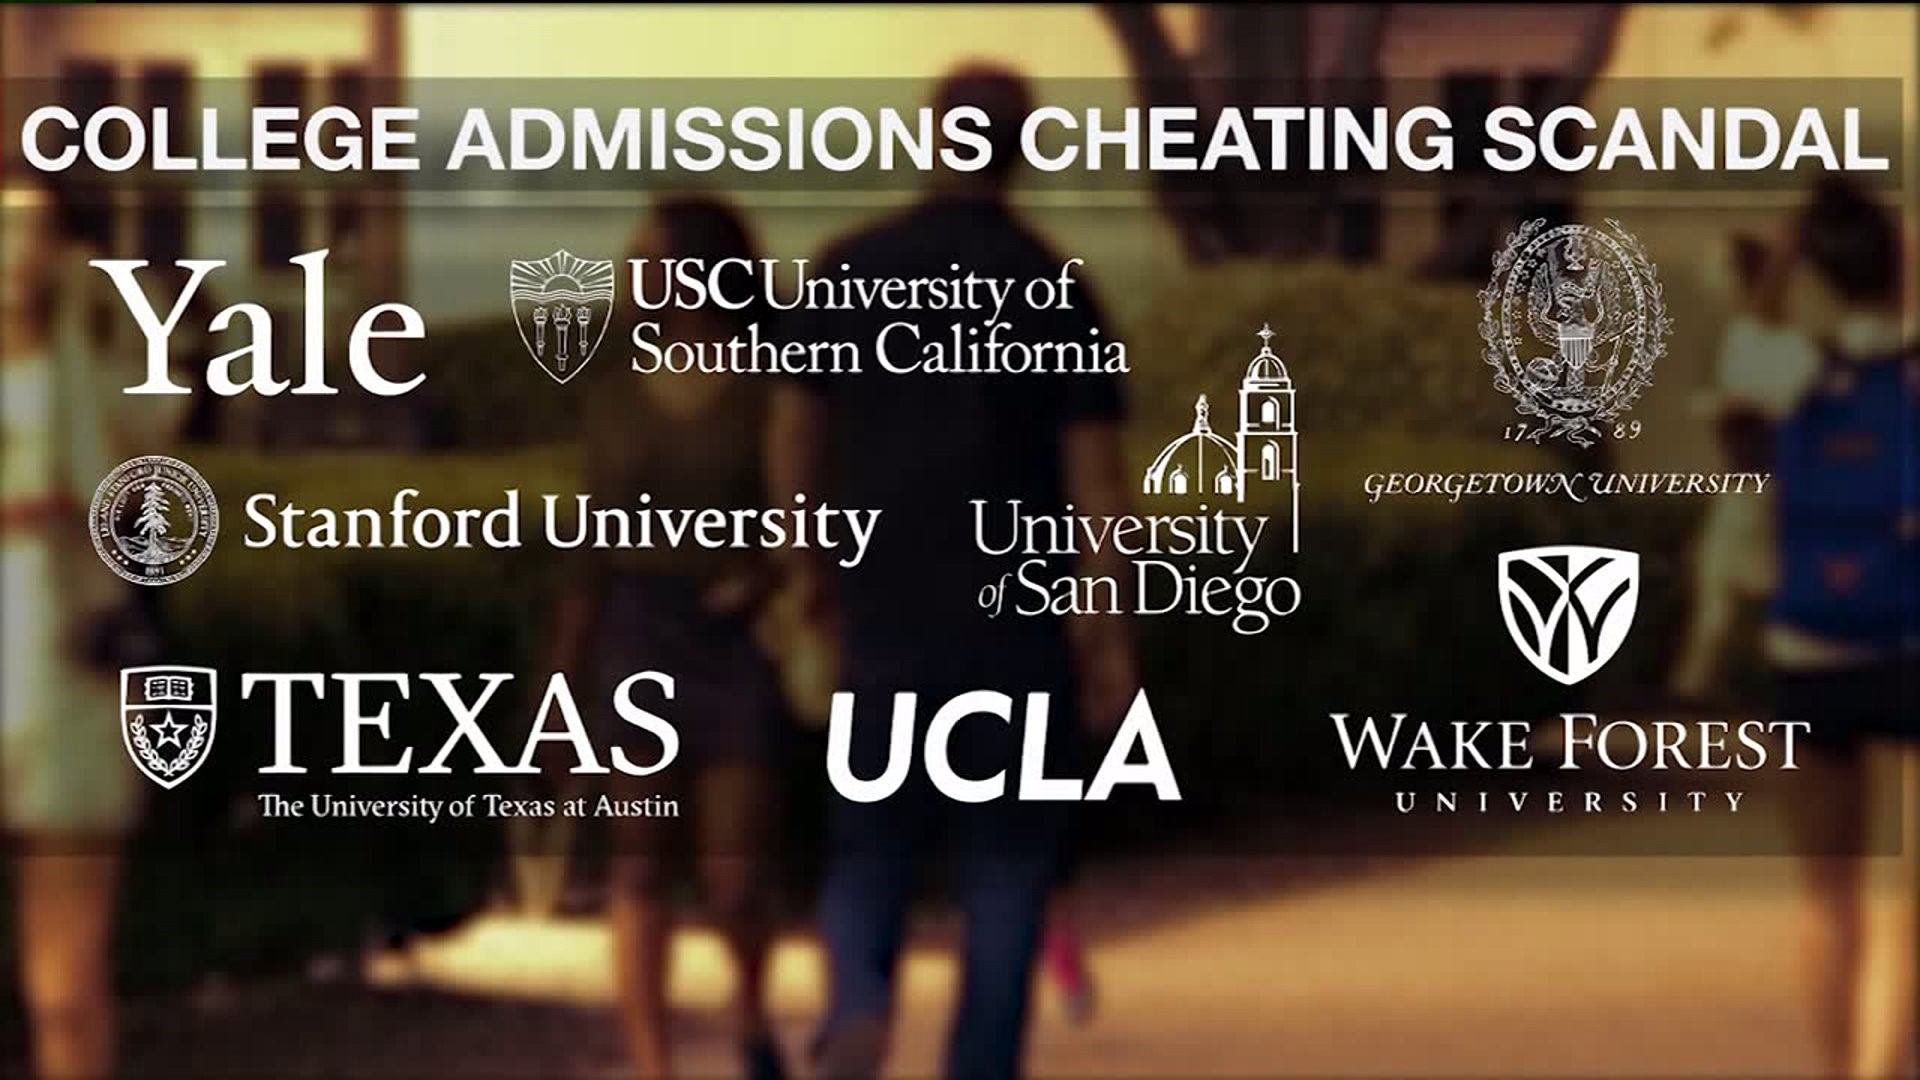 Students React to News of Alleged College Cheating Scam